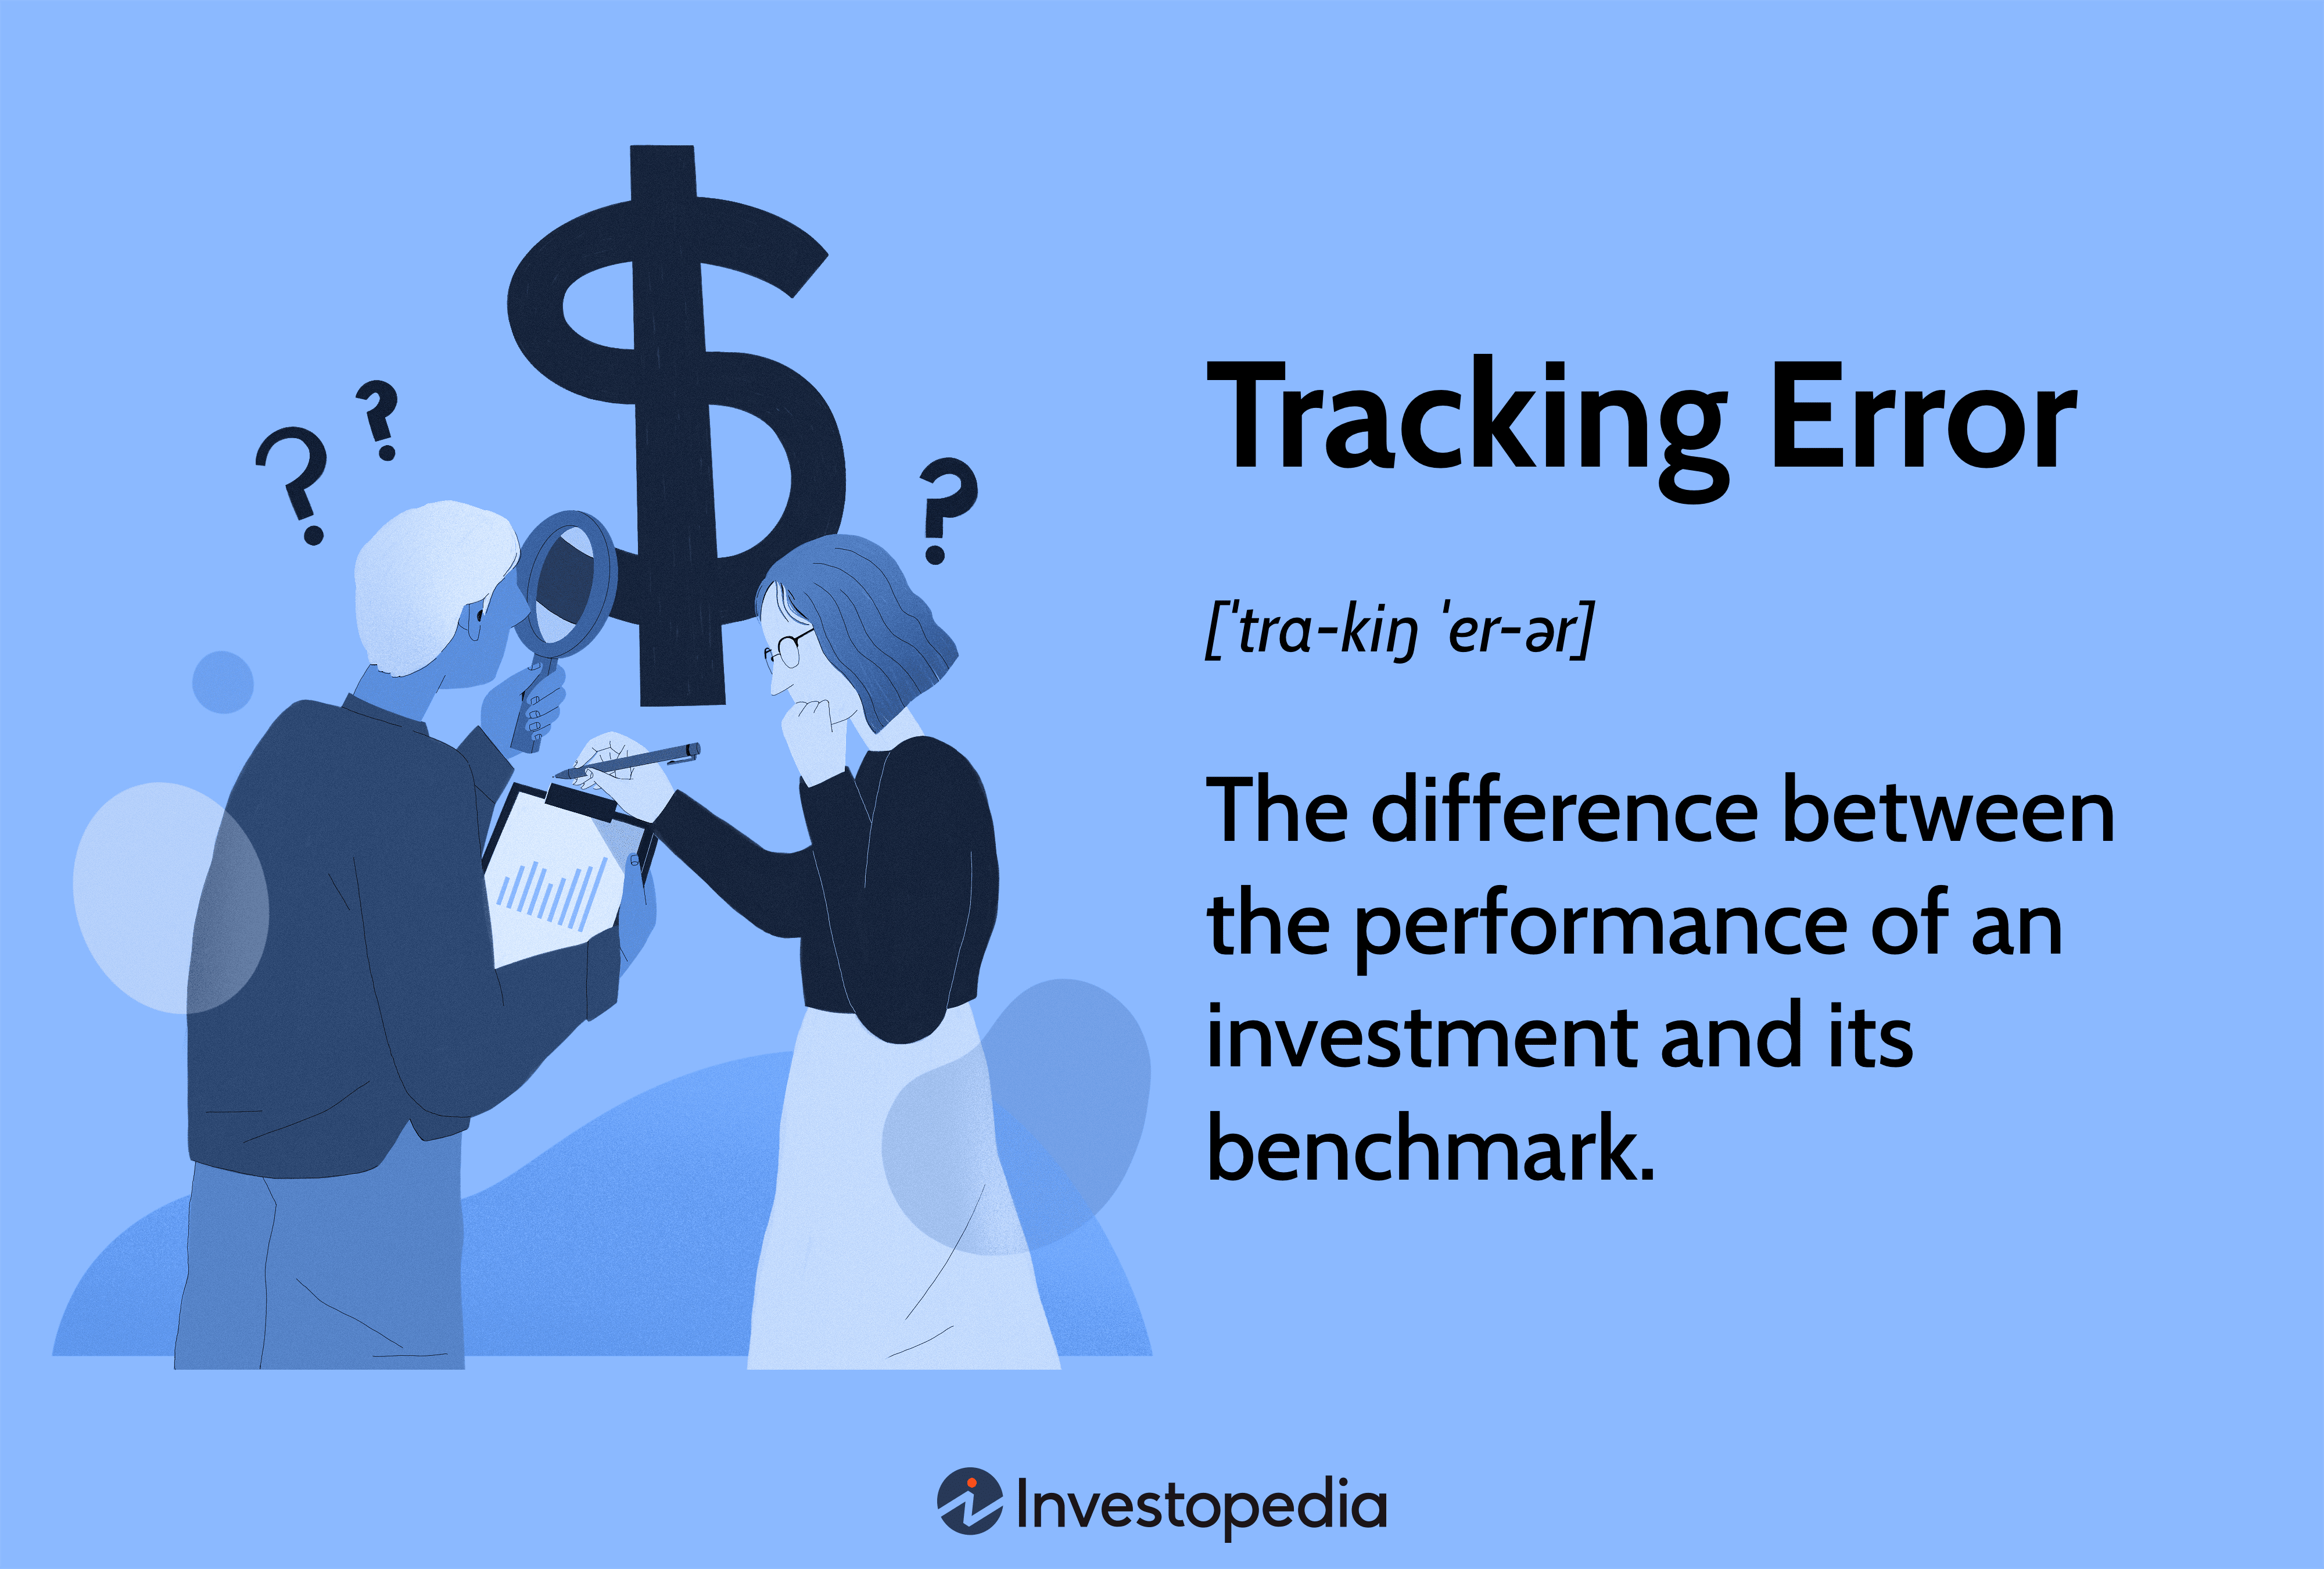 Tracking Error: The difference between the performance of an investment and its benchmark.